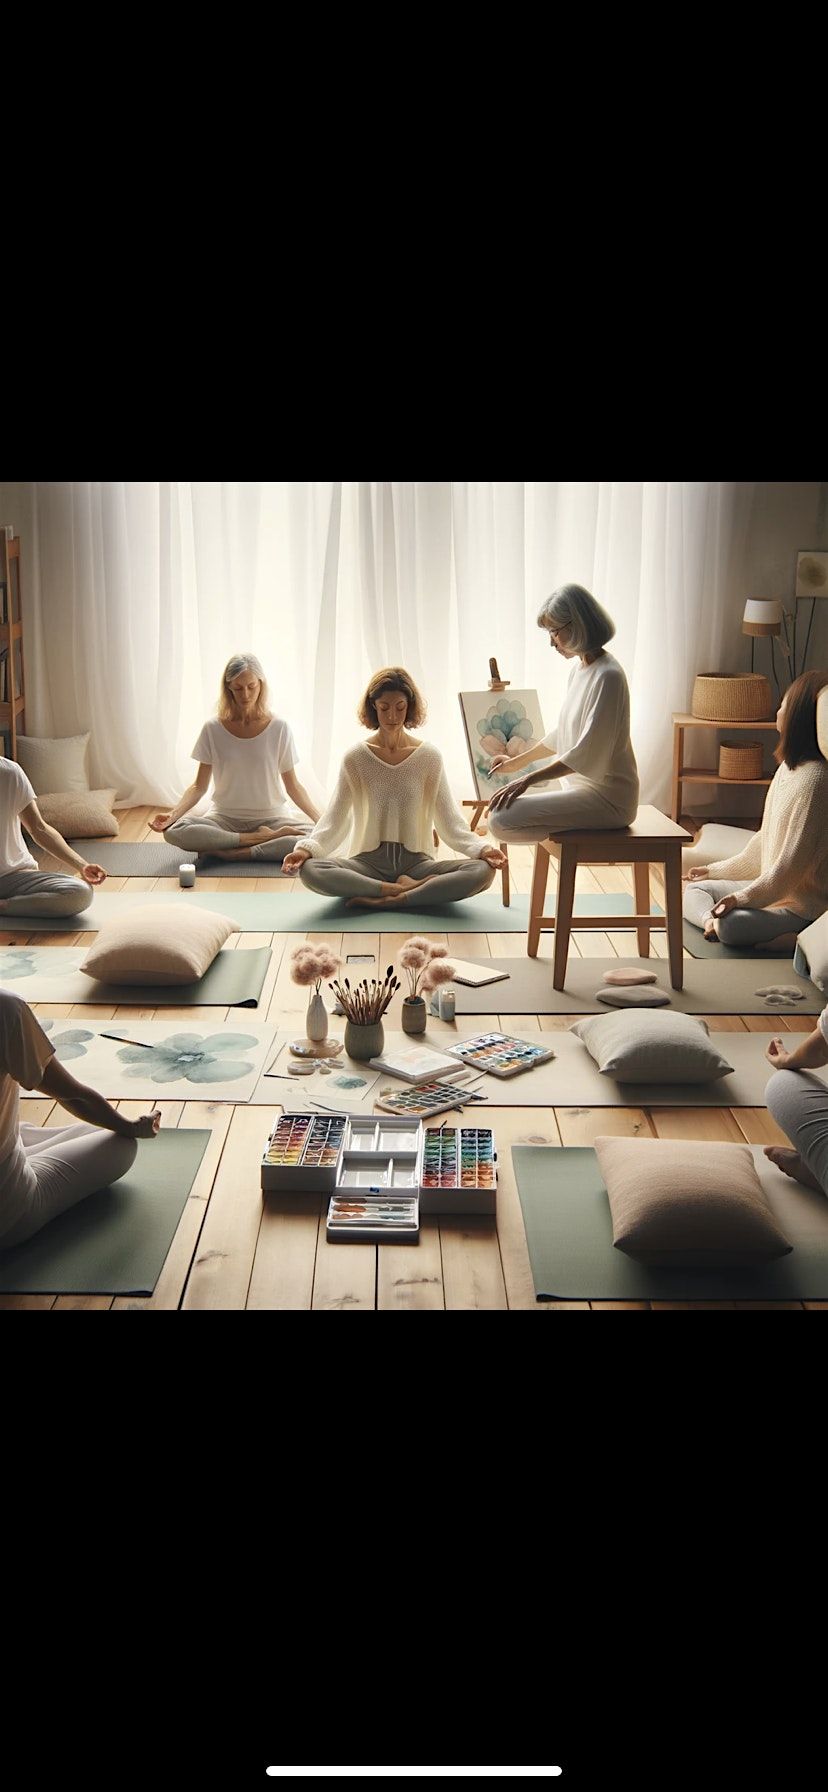 Relax and Unwind: Art Therapy and Restorative Yoga